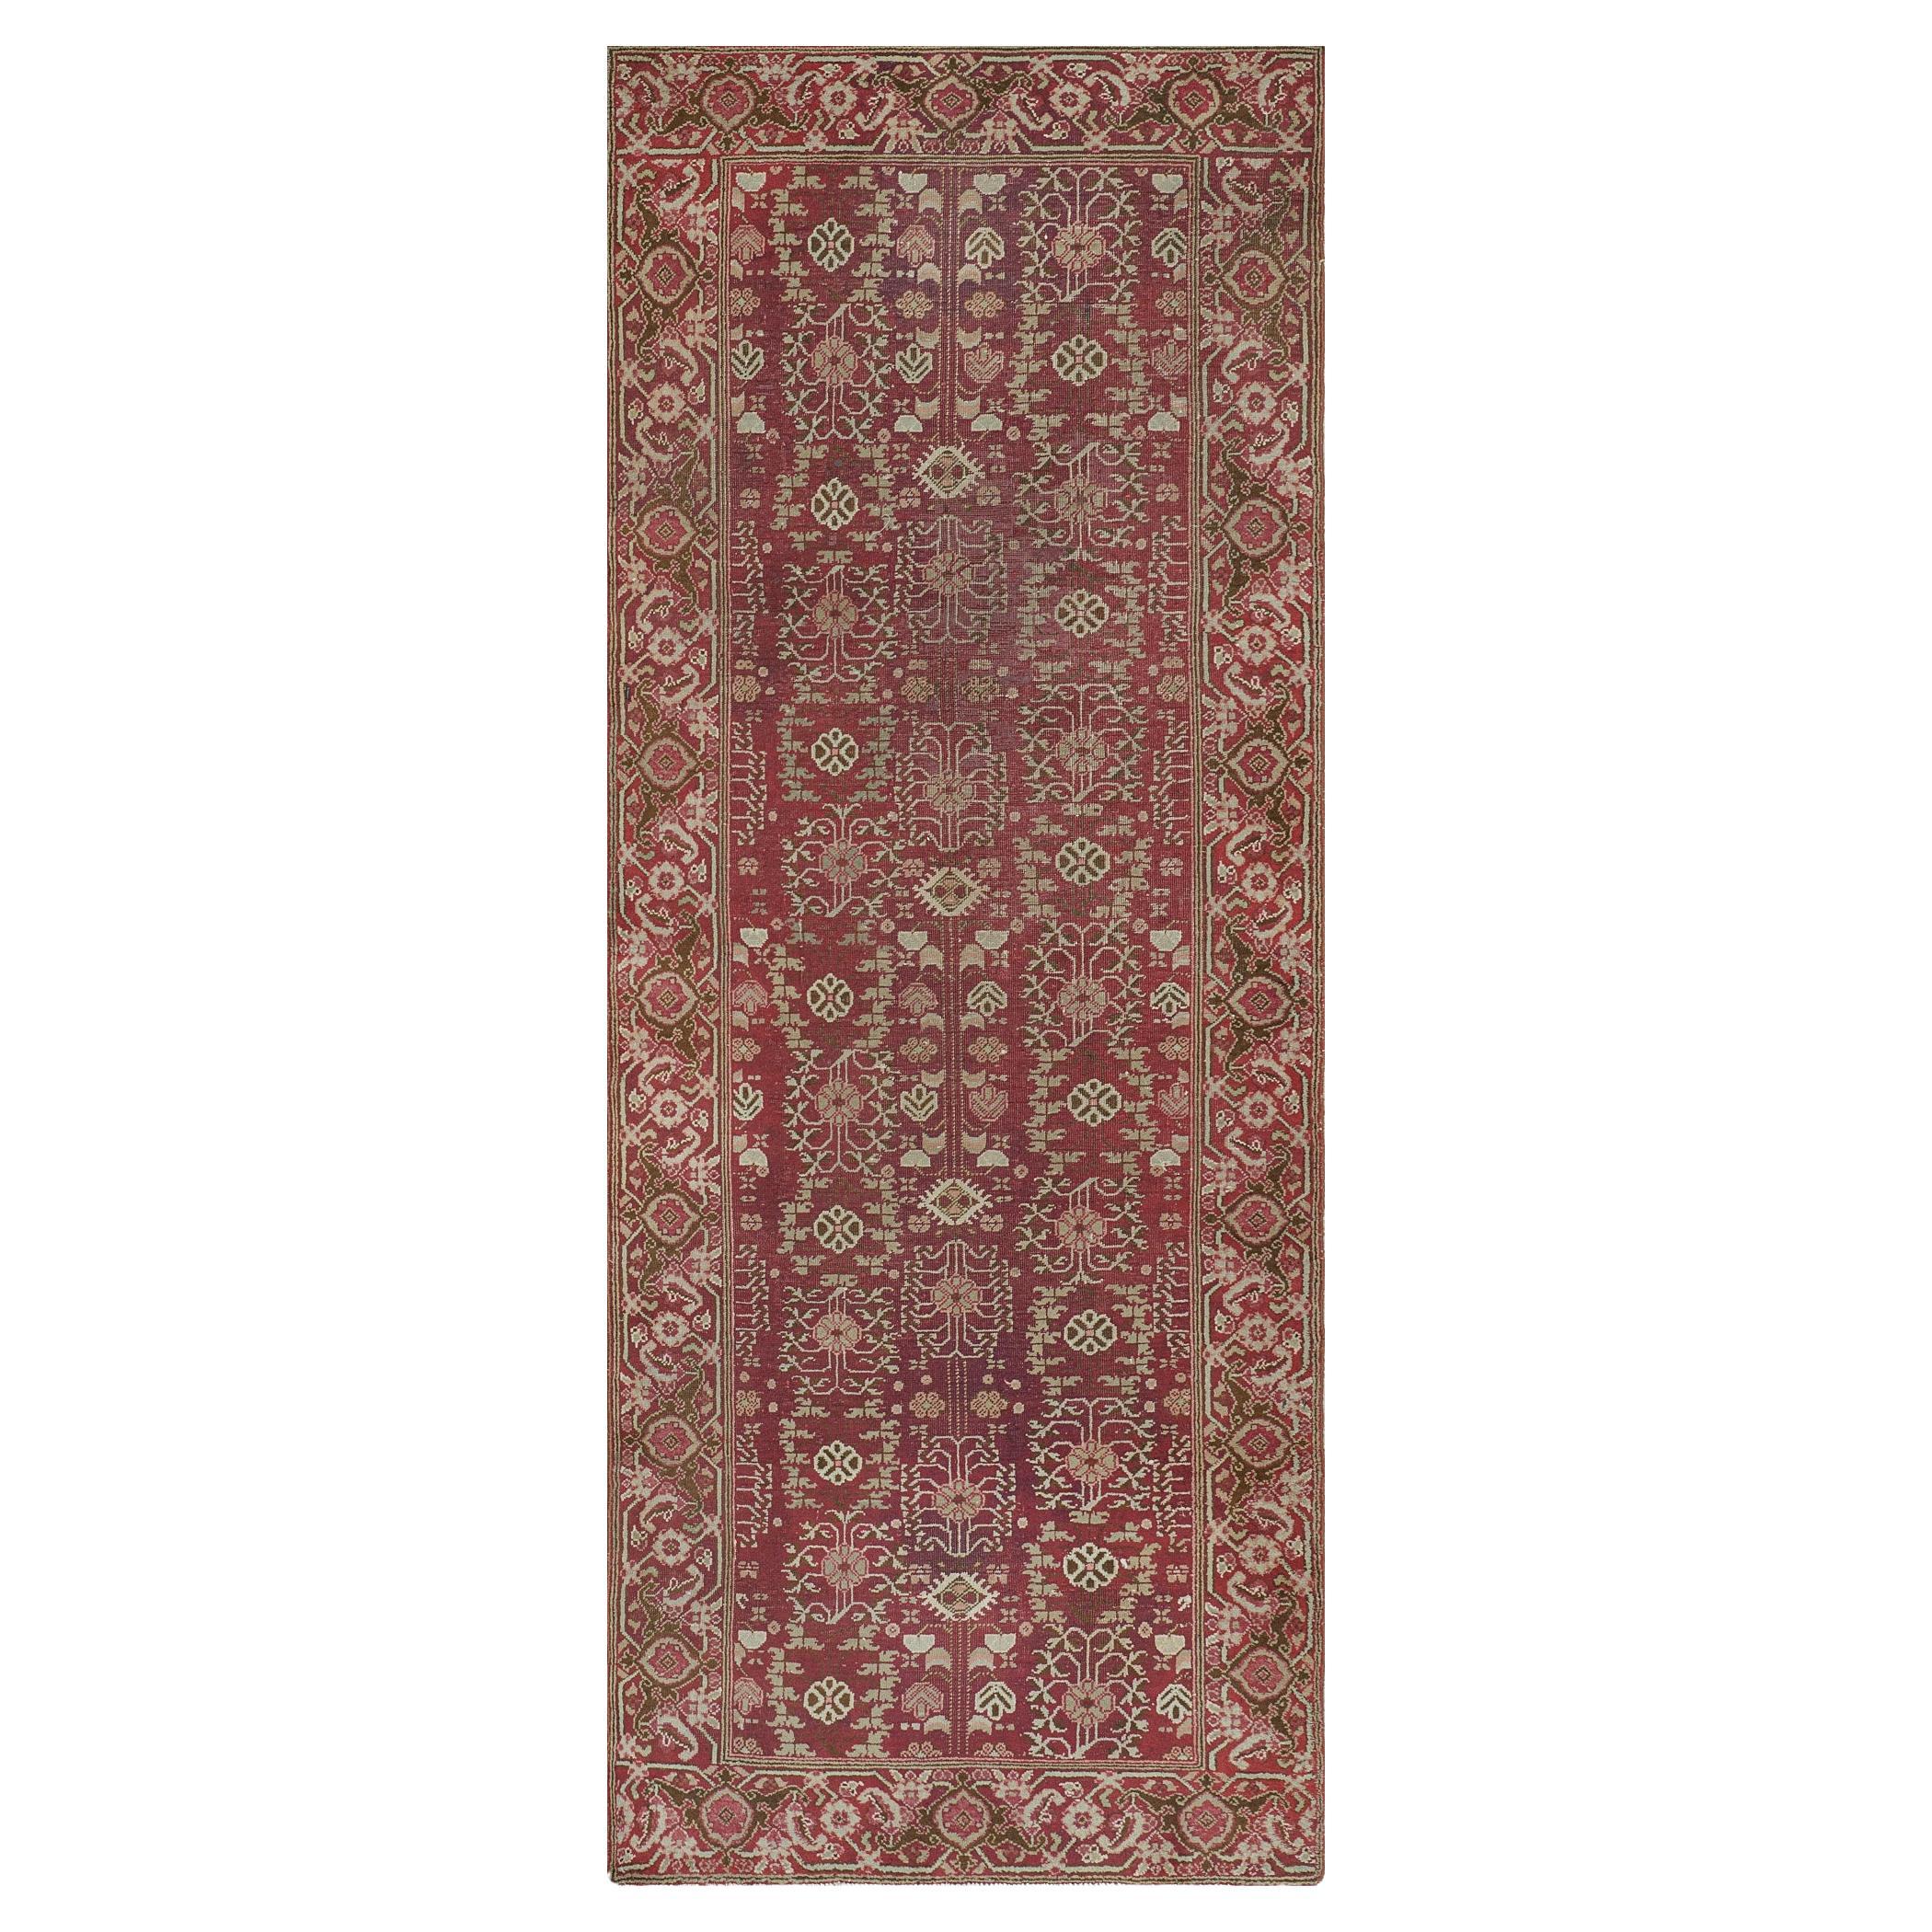 Wool Hand-Knotted Antique Circa-1900 Indian Agra Runner